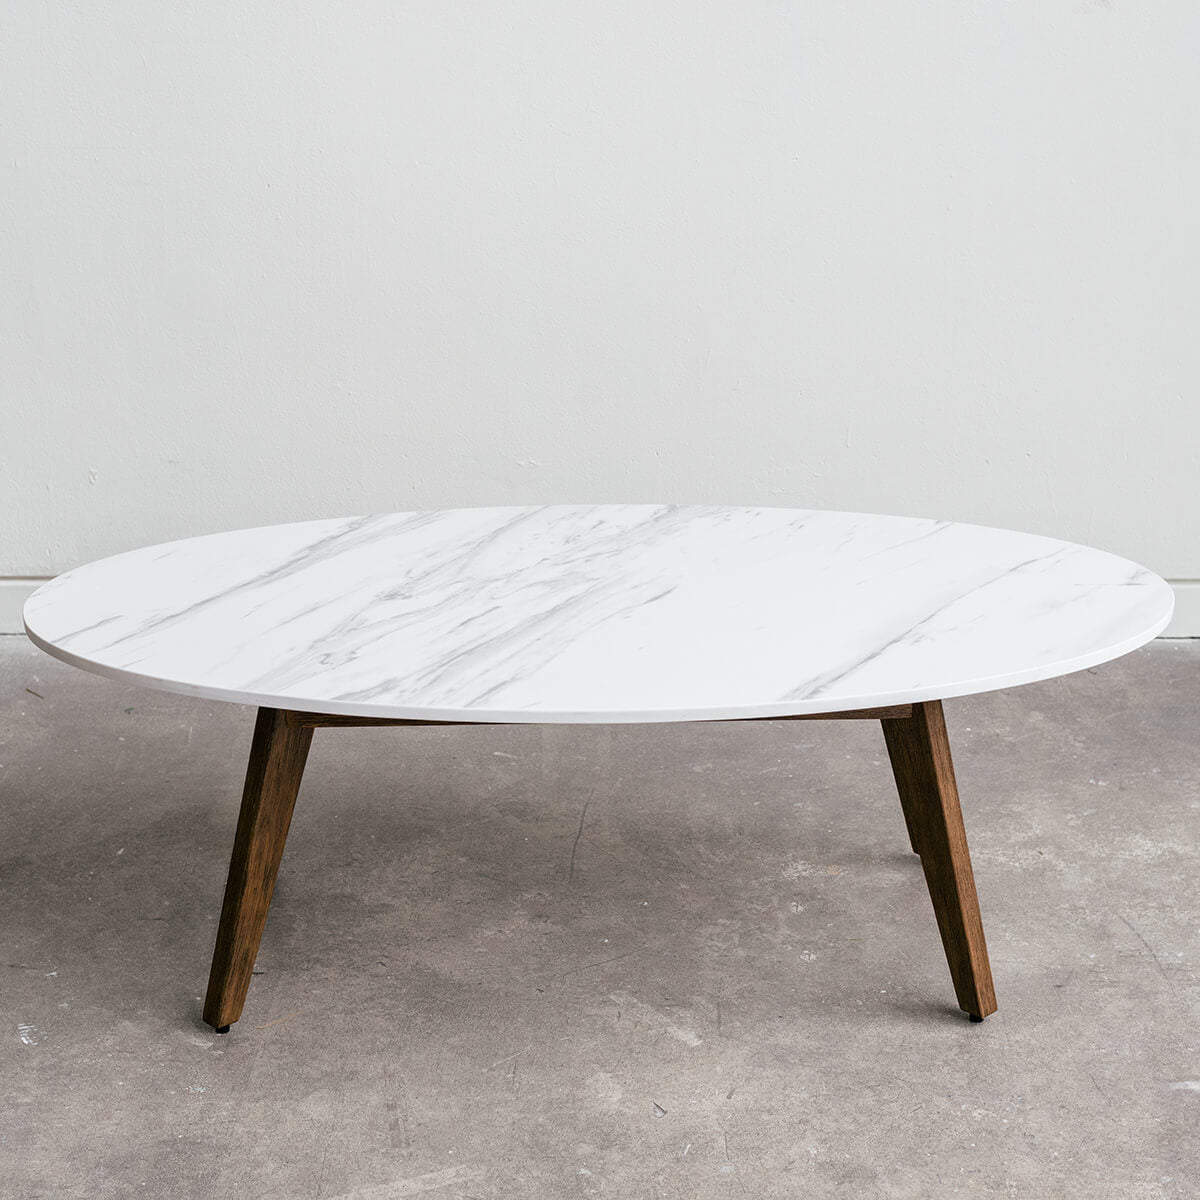 Mim Concept  best Modern furniture stores in Toronto, Ottawa and Mississauga to sell modern contemporary bedroom furniture and condo furniture. Minimal mid century modern coffee side table white marble minimalist walnut wood modern organic luxury Scandinavian